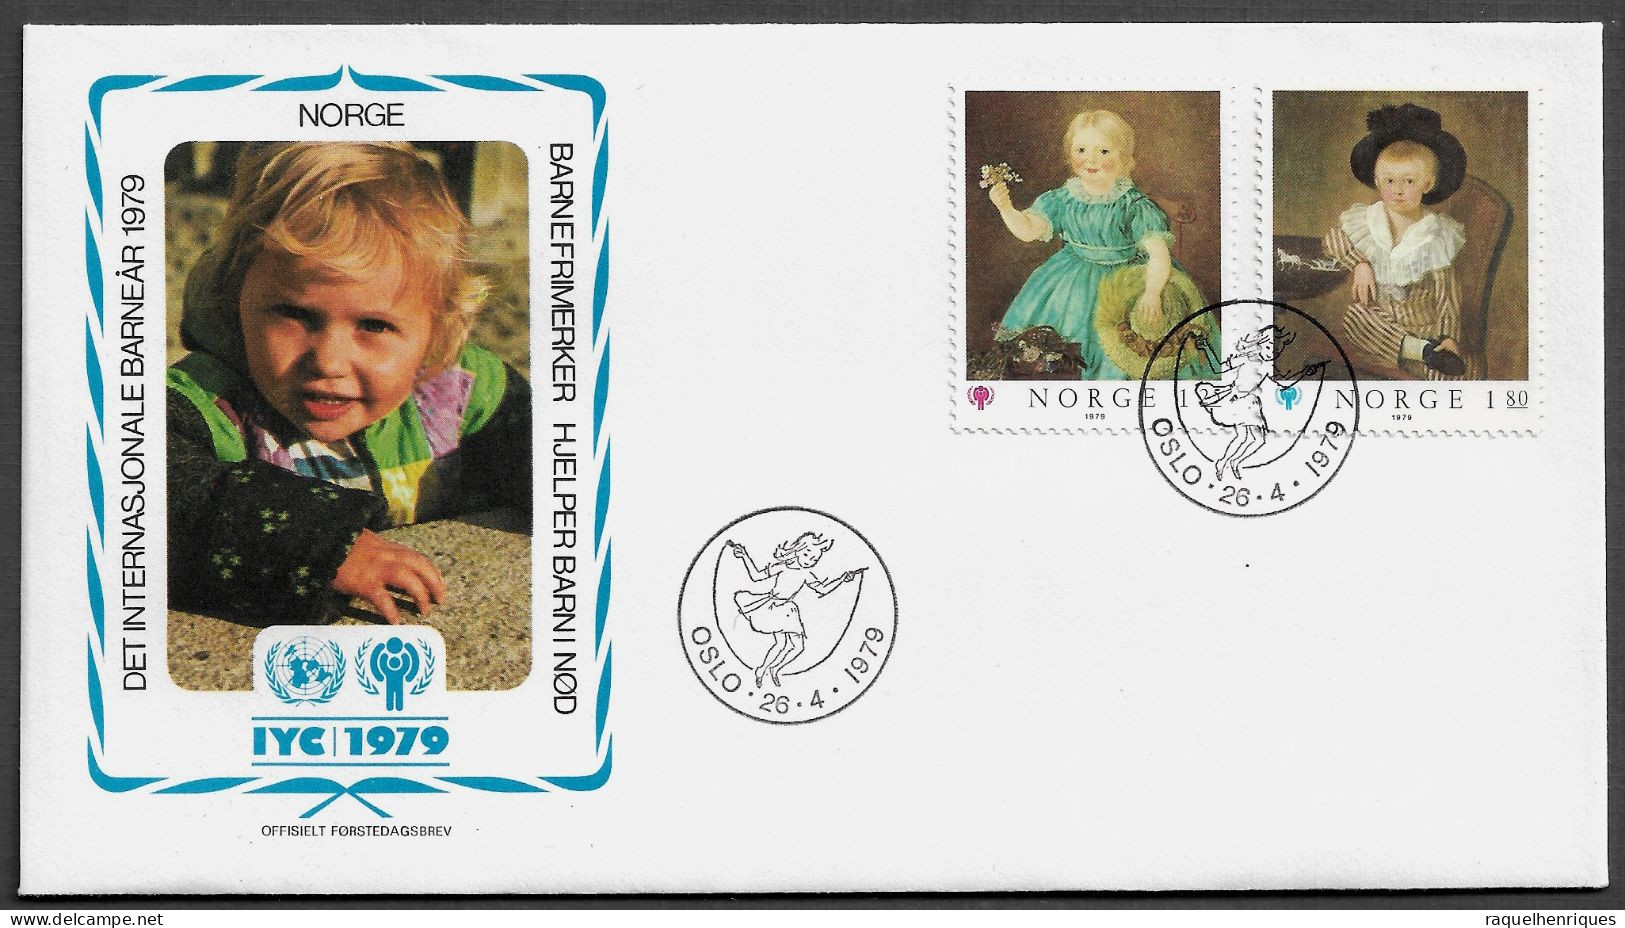 NORWAY FDC COVER - 1979 International Year Of The Child SET FDC (FDC79#08) - Covers & Documents